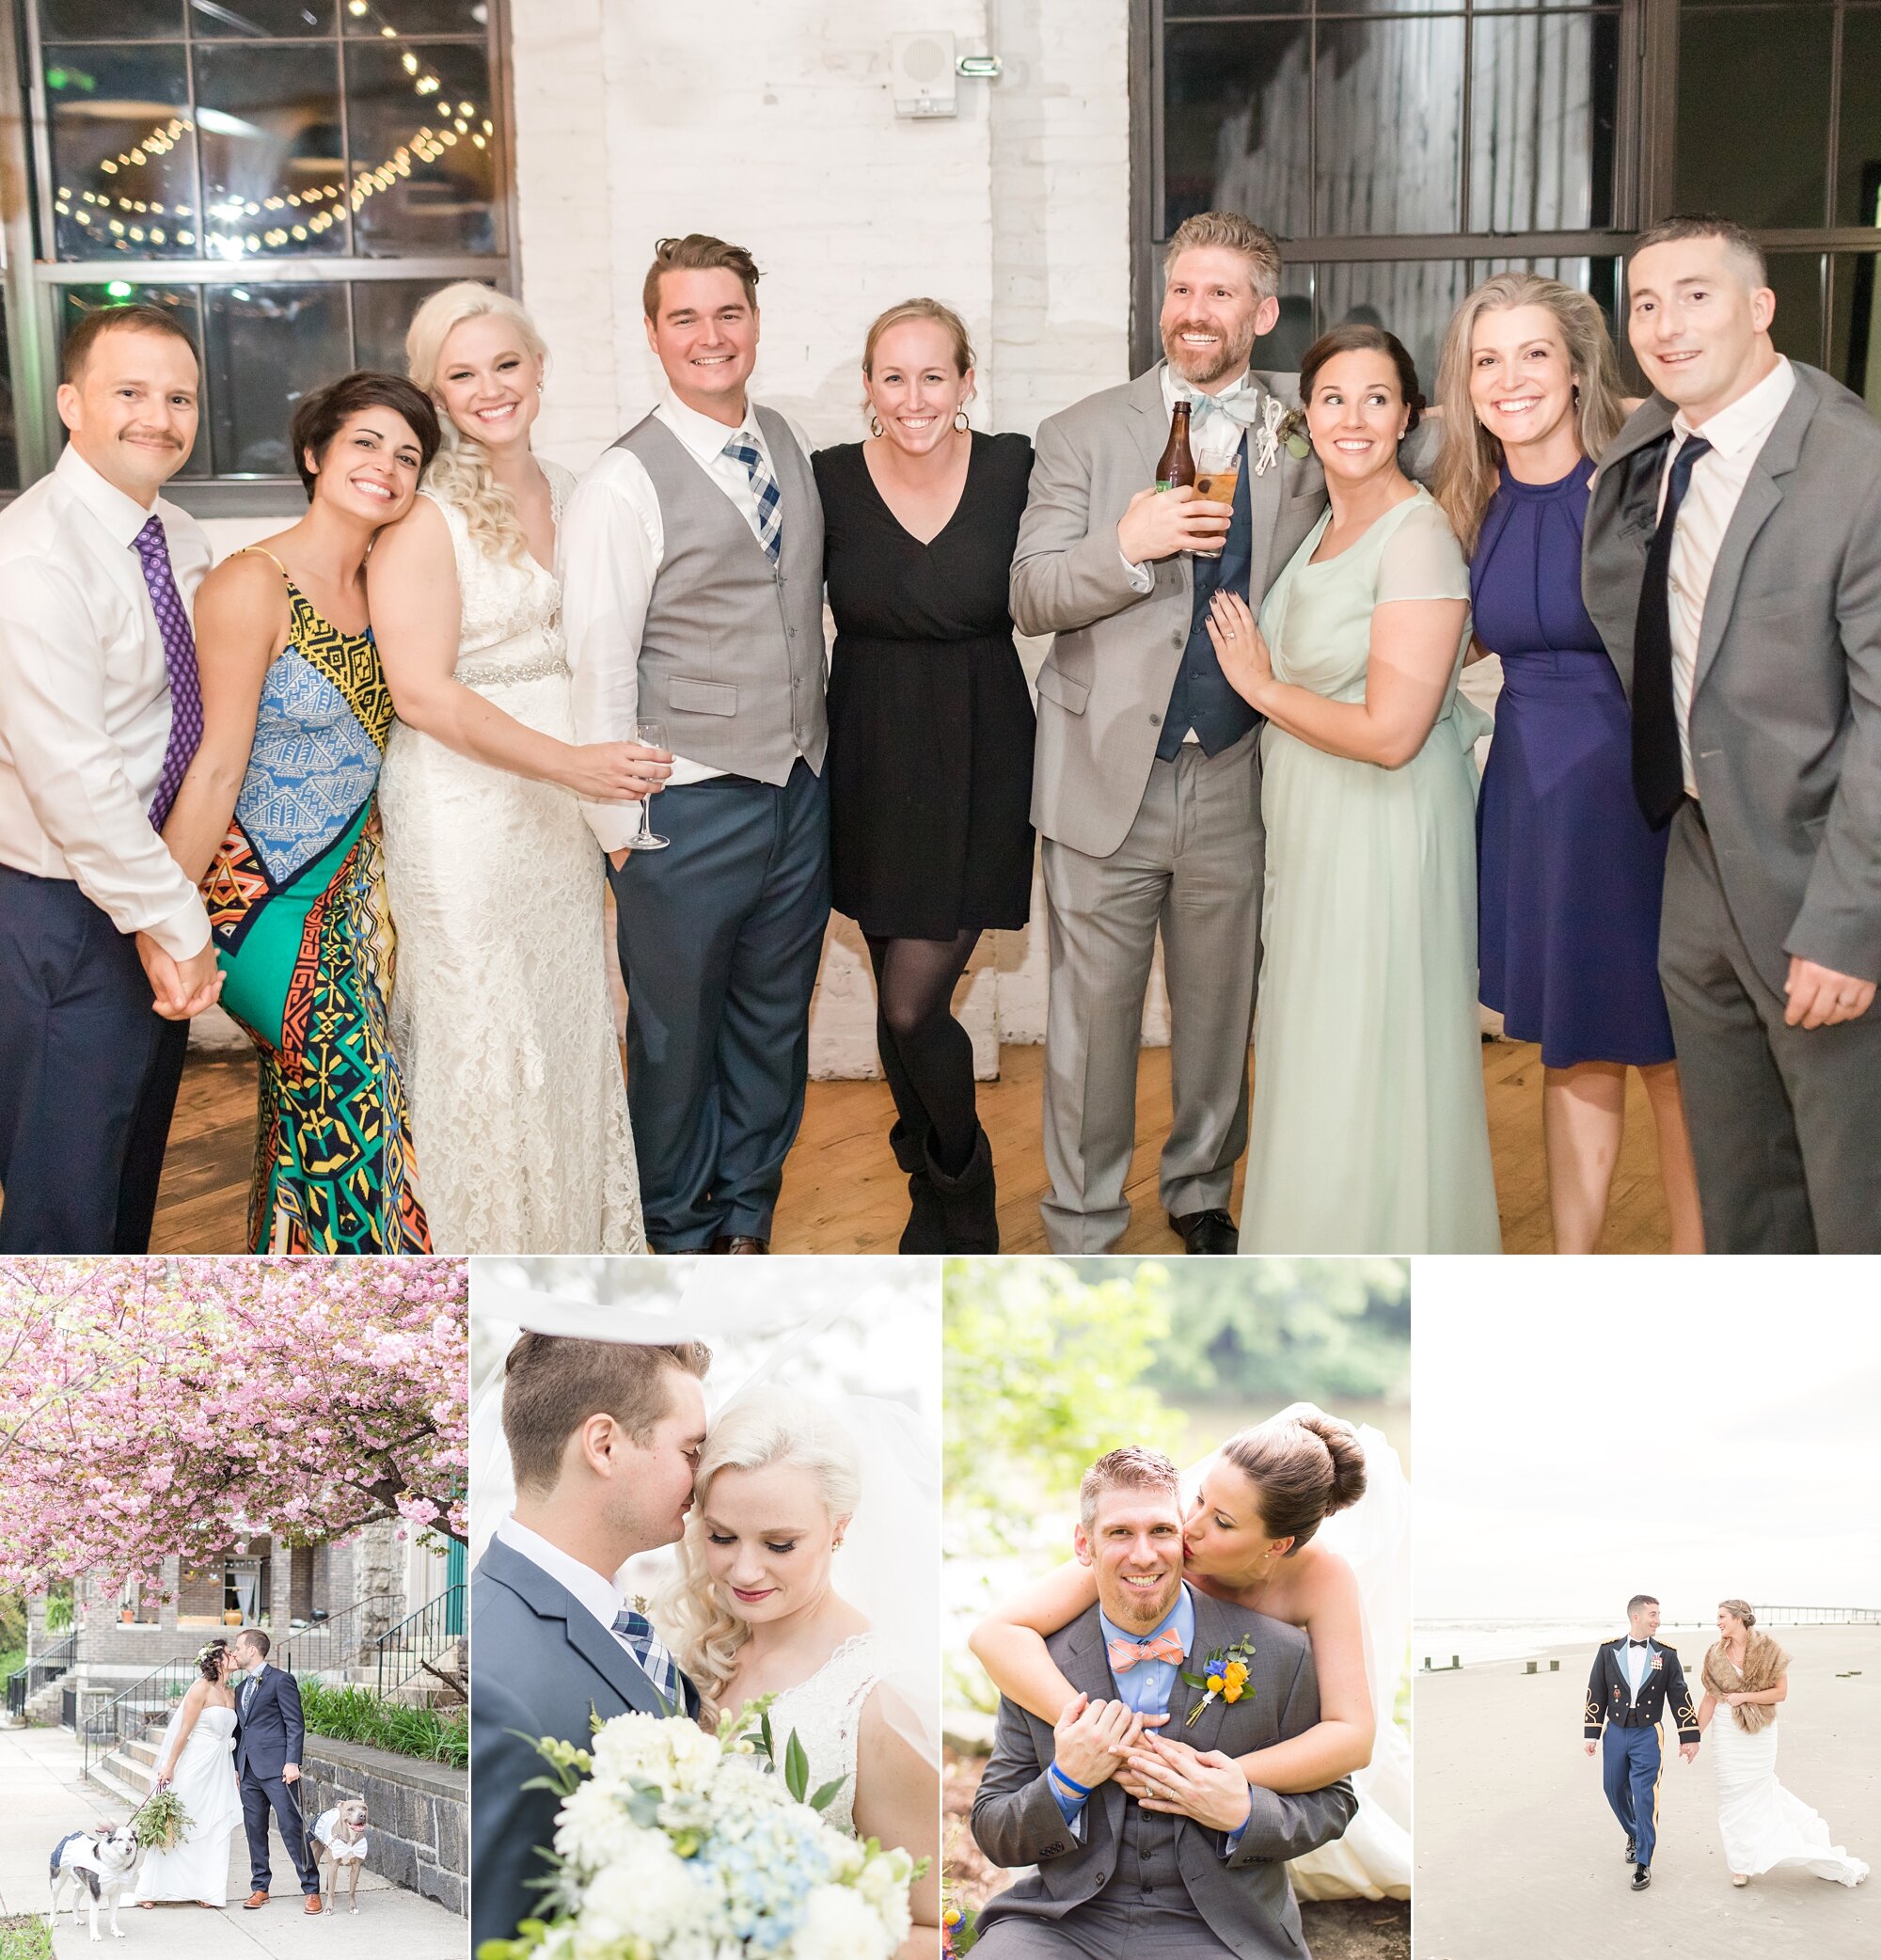  This photo is so special to me! I shot each of these amazing couples weddings over the years. We love our CrossFit community!  